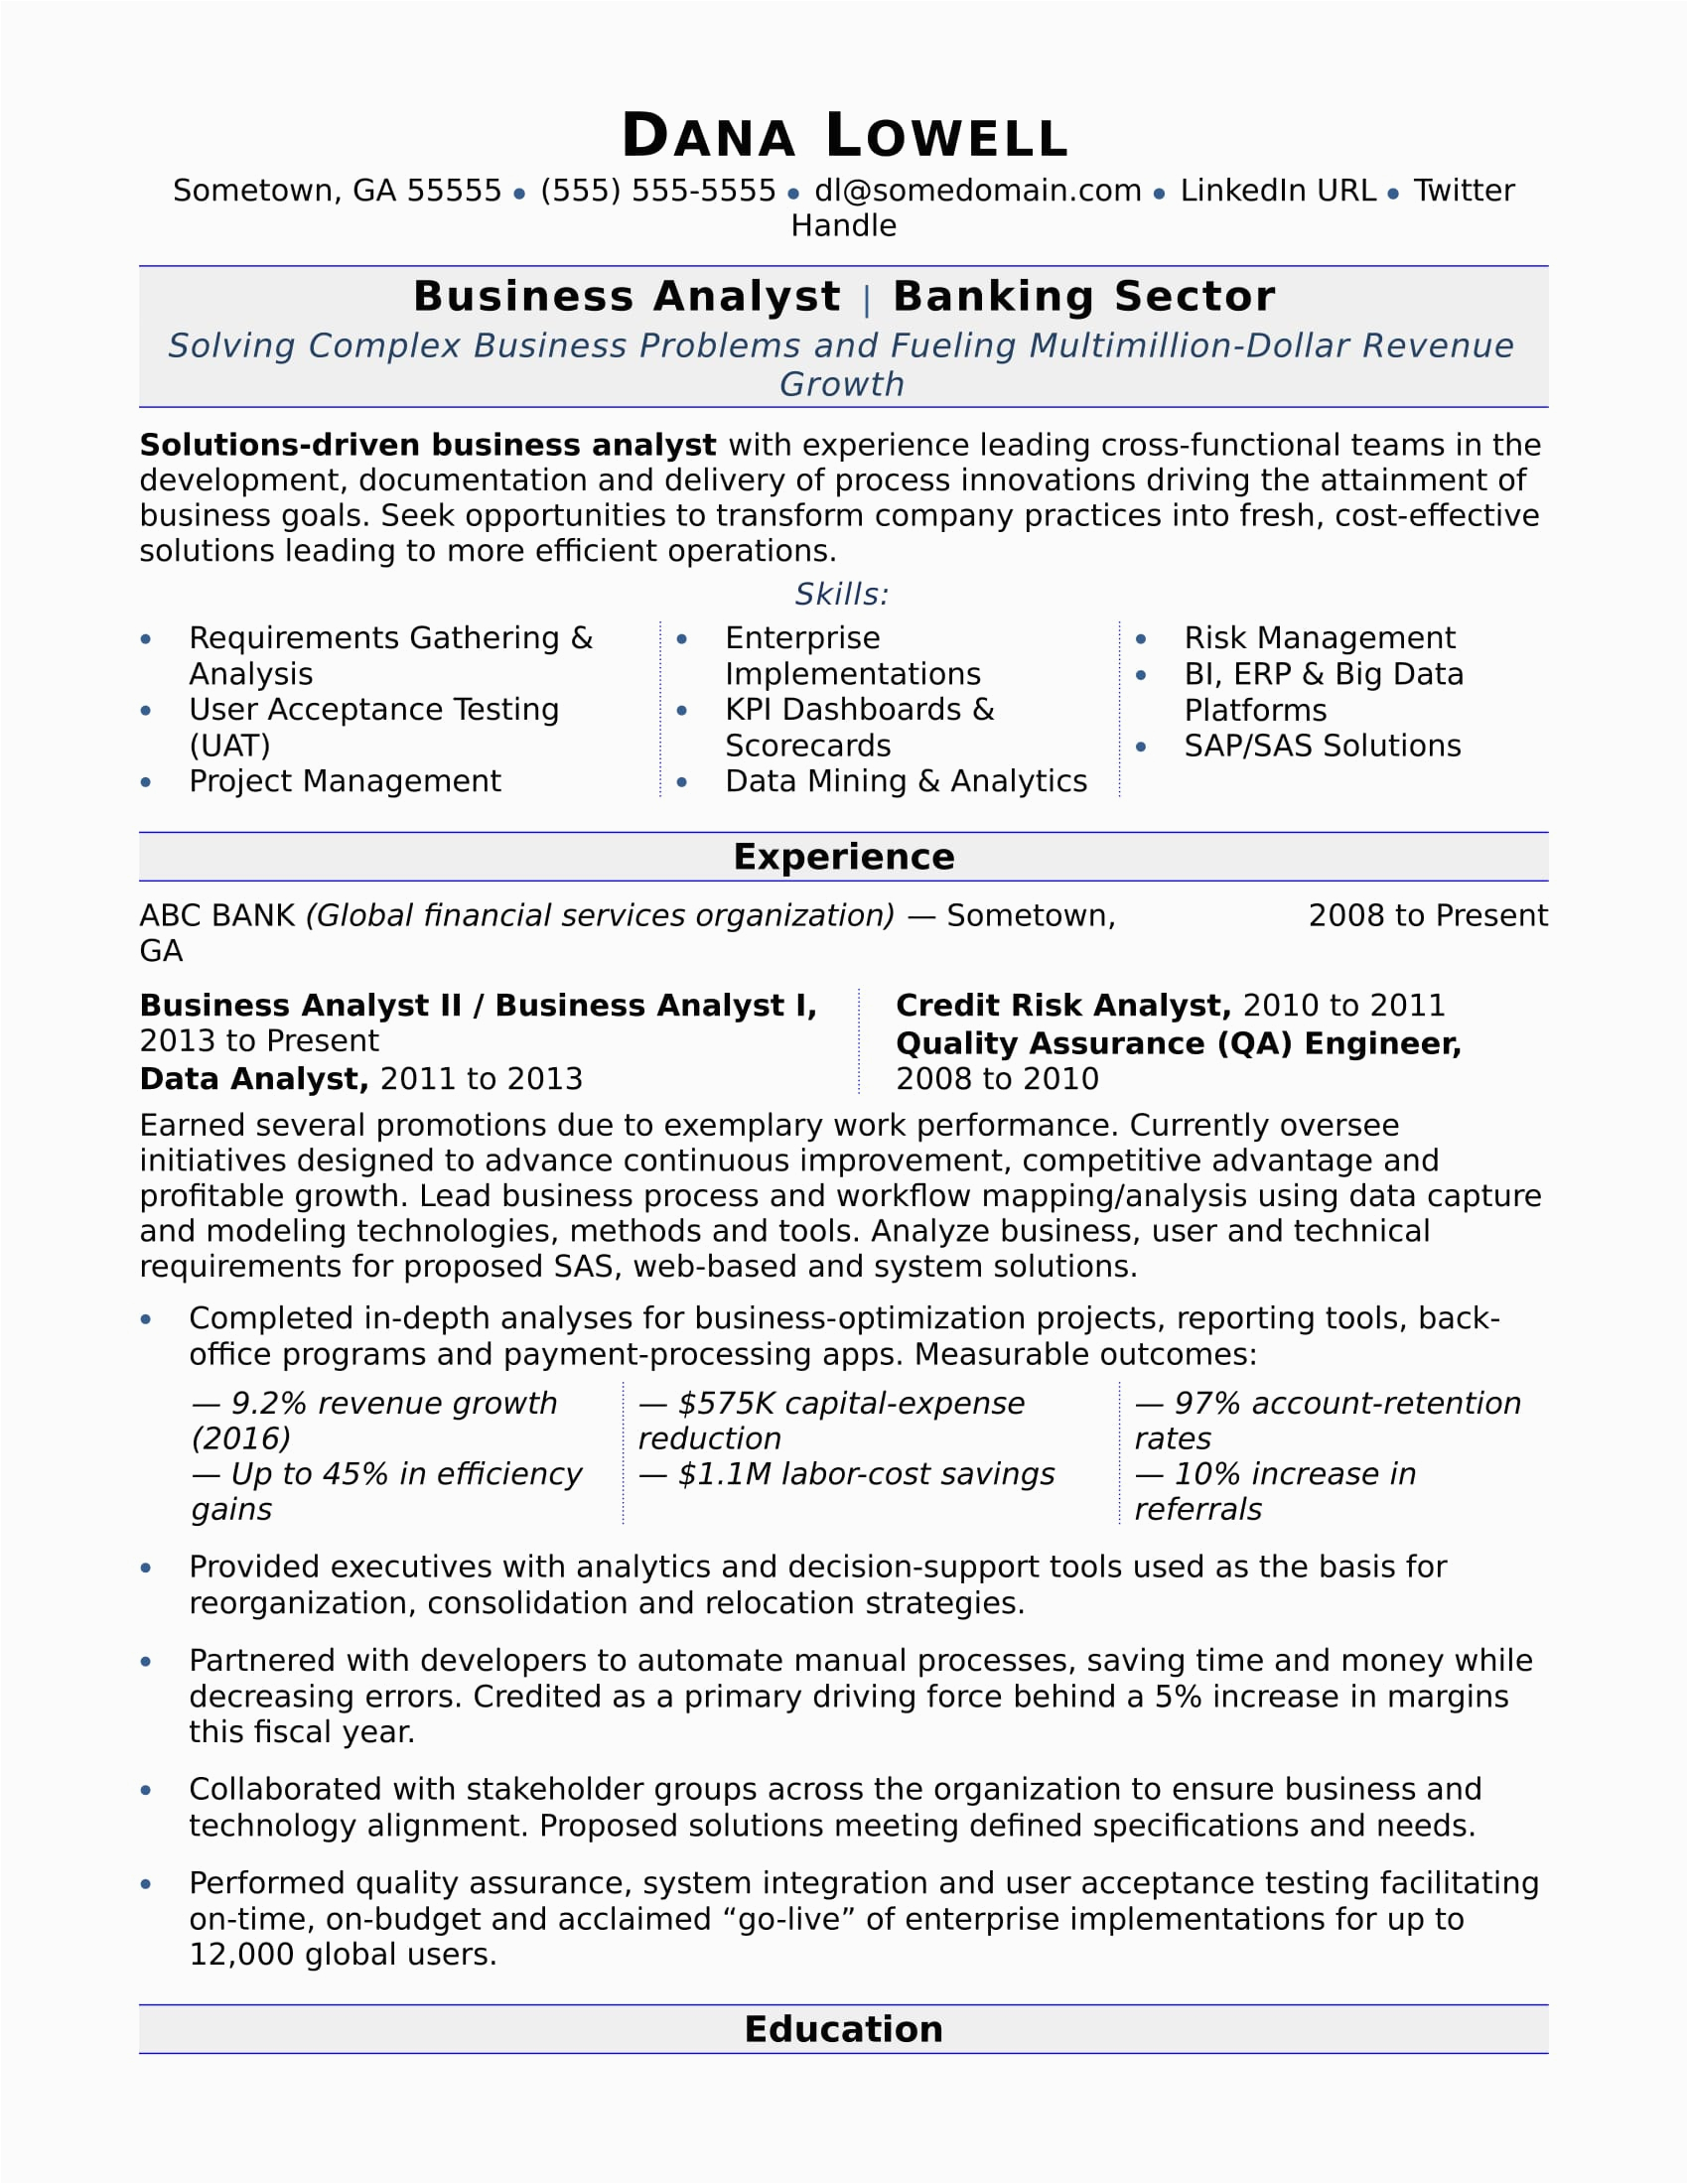 Sample Resume Director Of Business Analyst Sample Resume Business Analyst software Business Analyst Resume